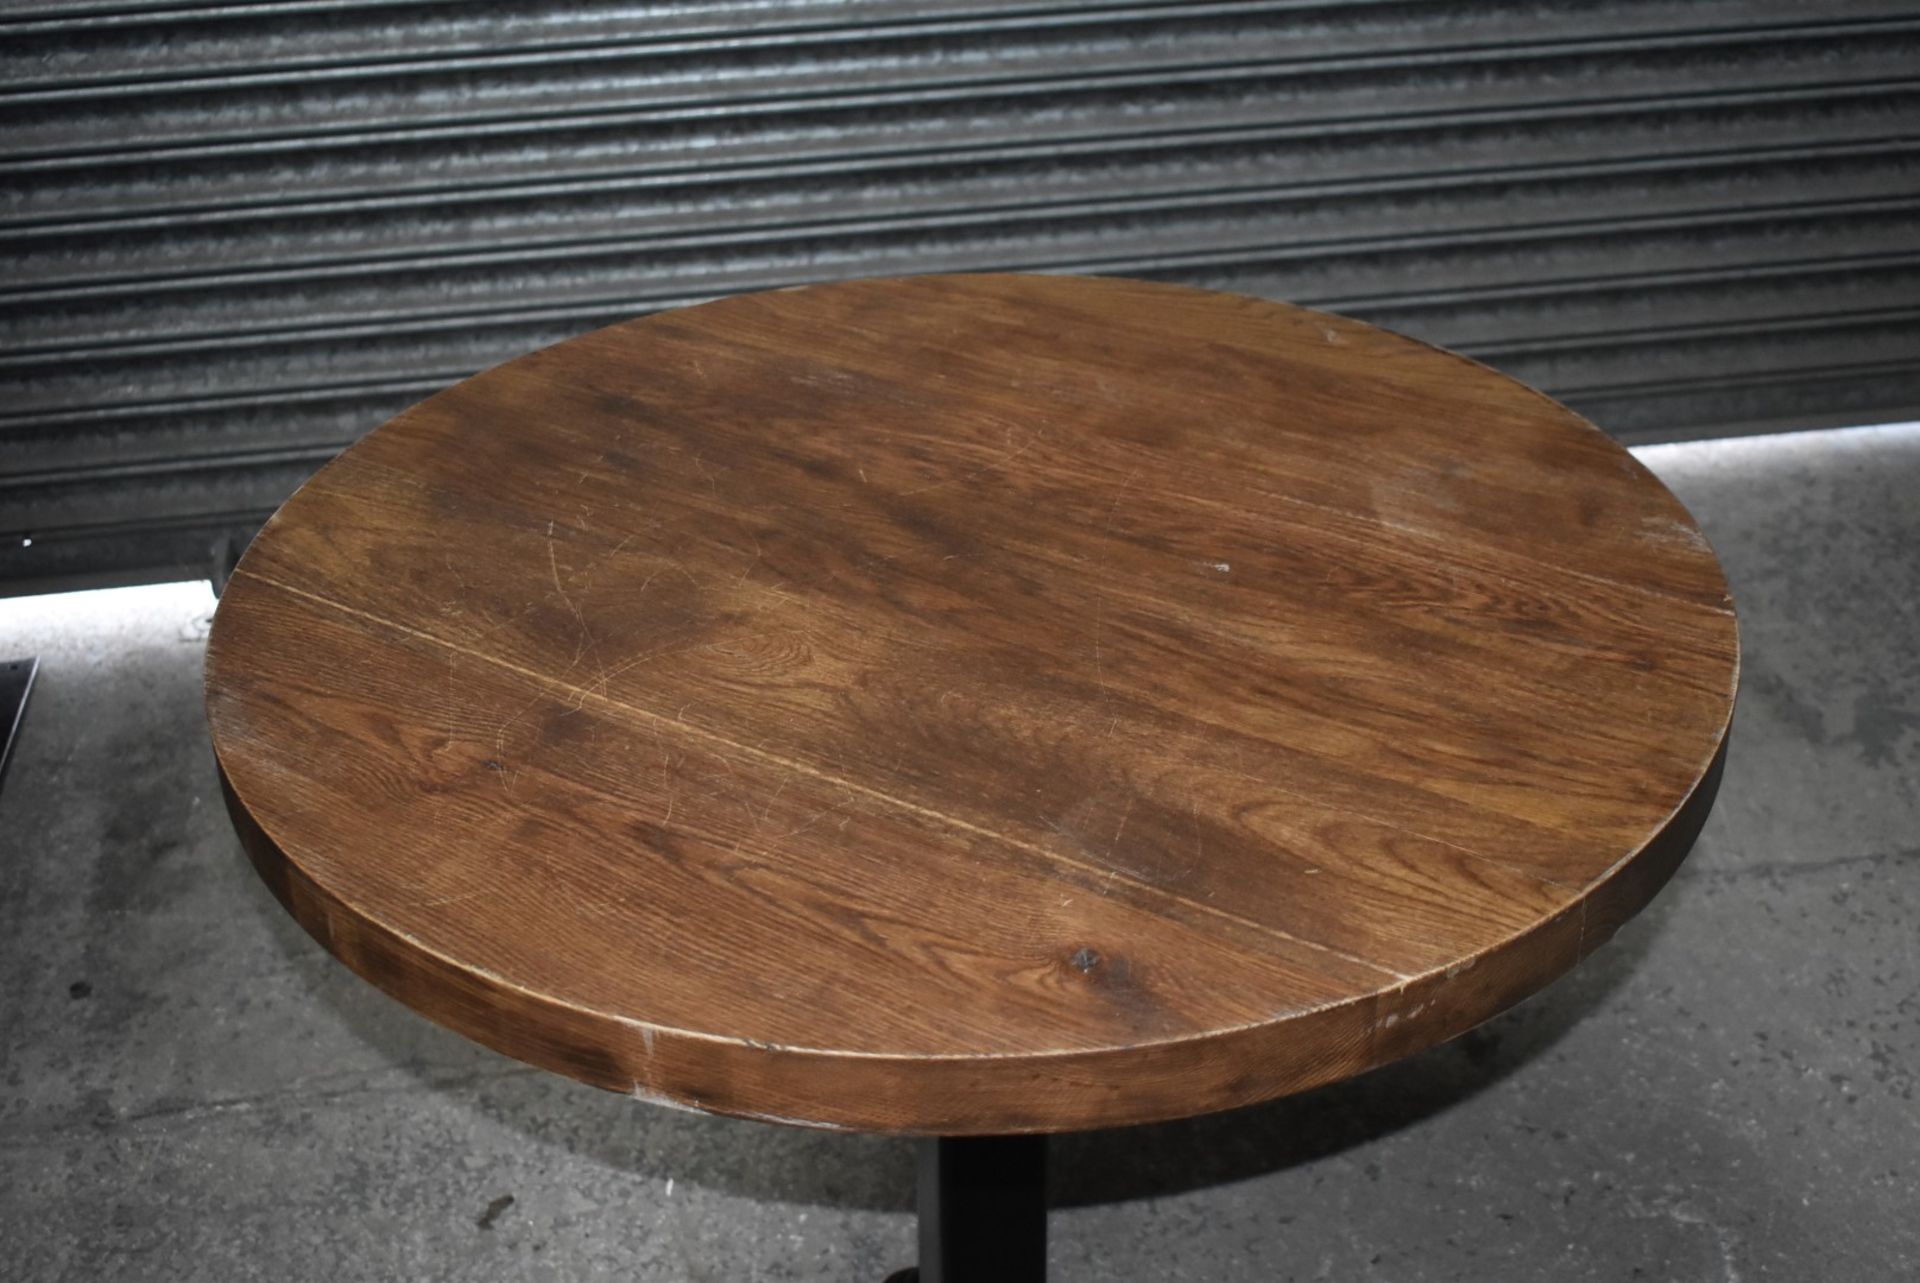 9 x Restaurant Dining Tables With Cast Iron Bases and Solid Wood Tops - Includes Square and Round - Image 2 of 13